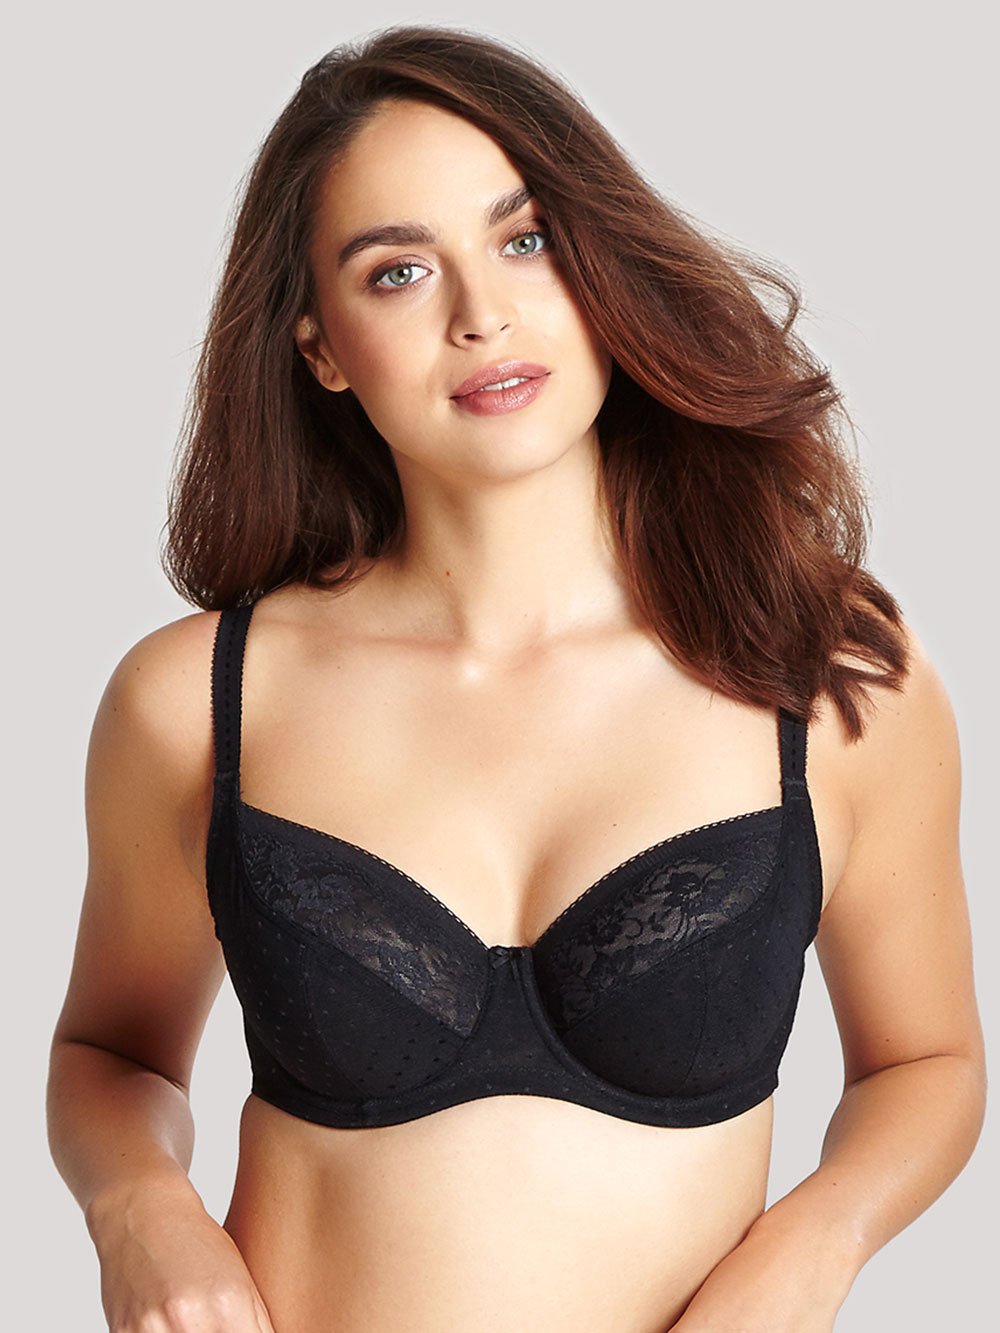 Bras And Honey - Now introducing Afterpay! Pay in 4 easy payments